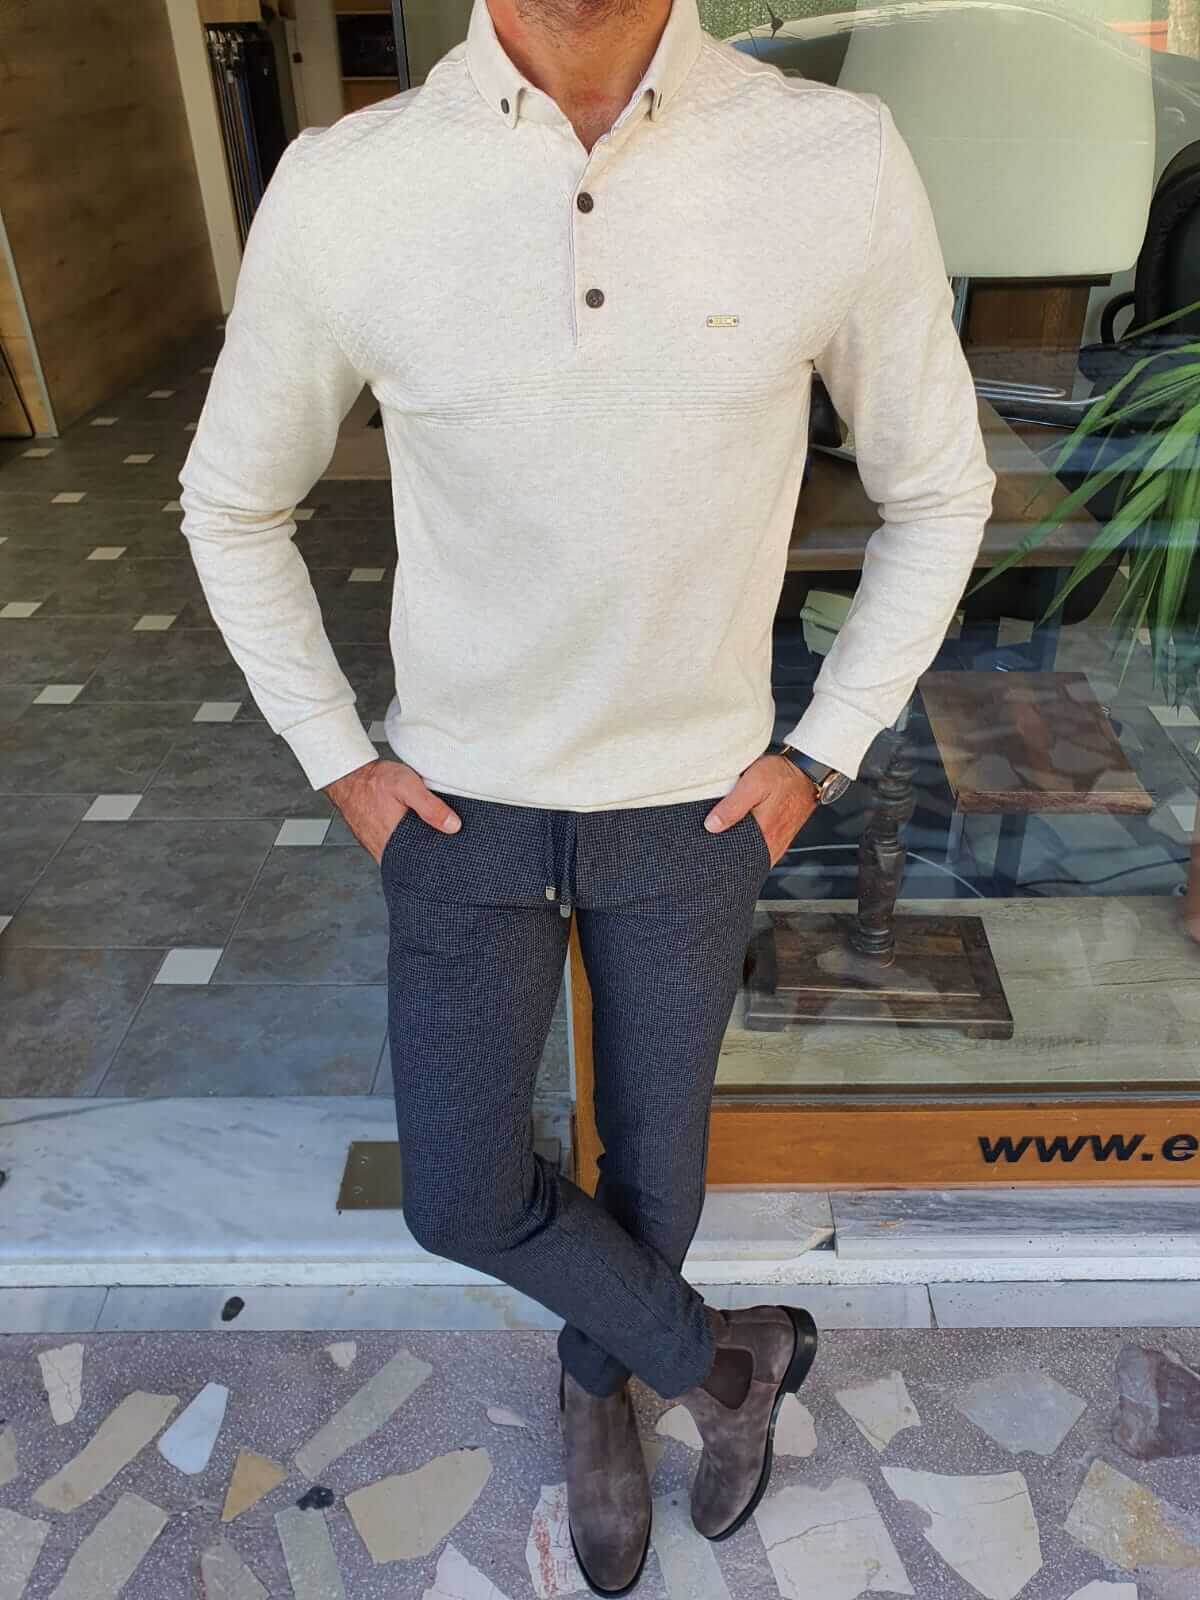 A beige longsleeve combed knitwear garment with a soft, textured surface.